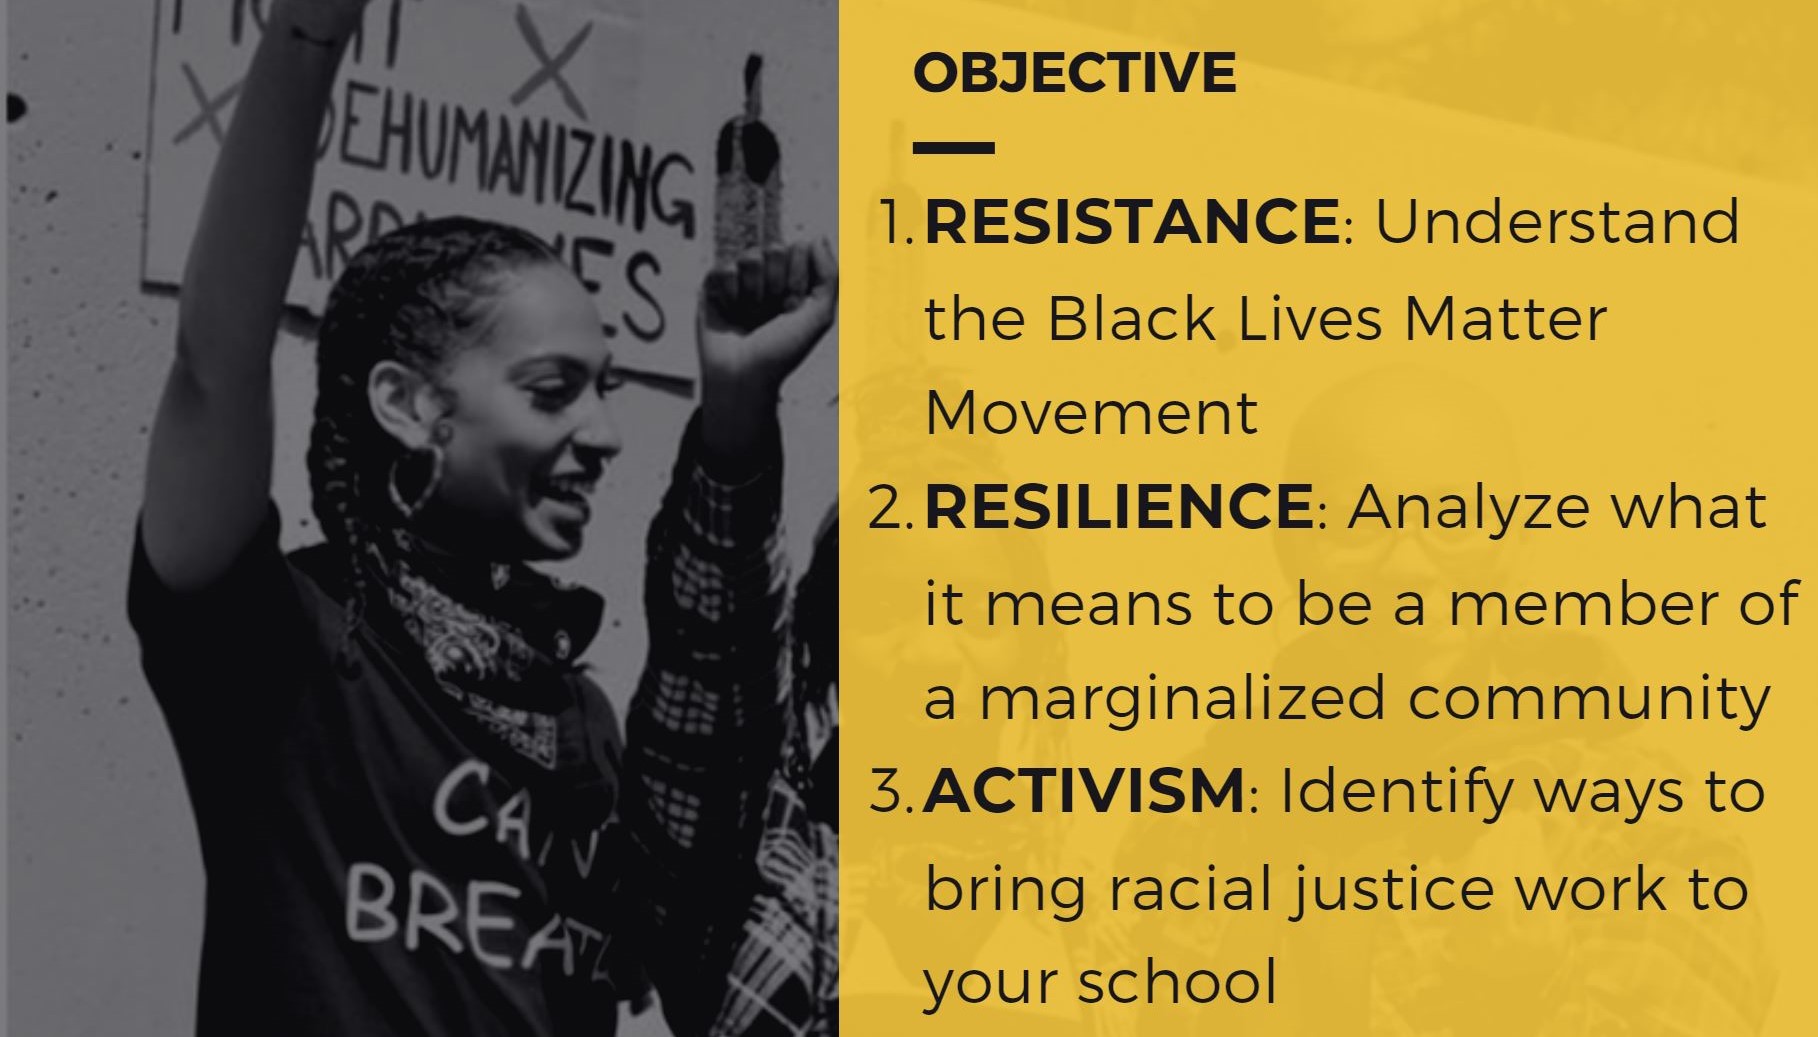 Graphic listing the objectives of the training: resistance, resilience, activism.